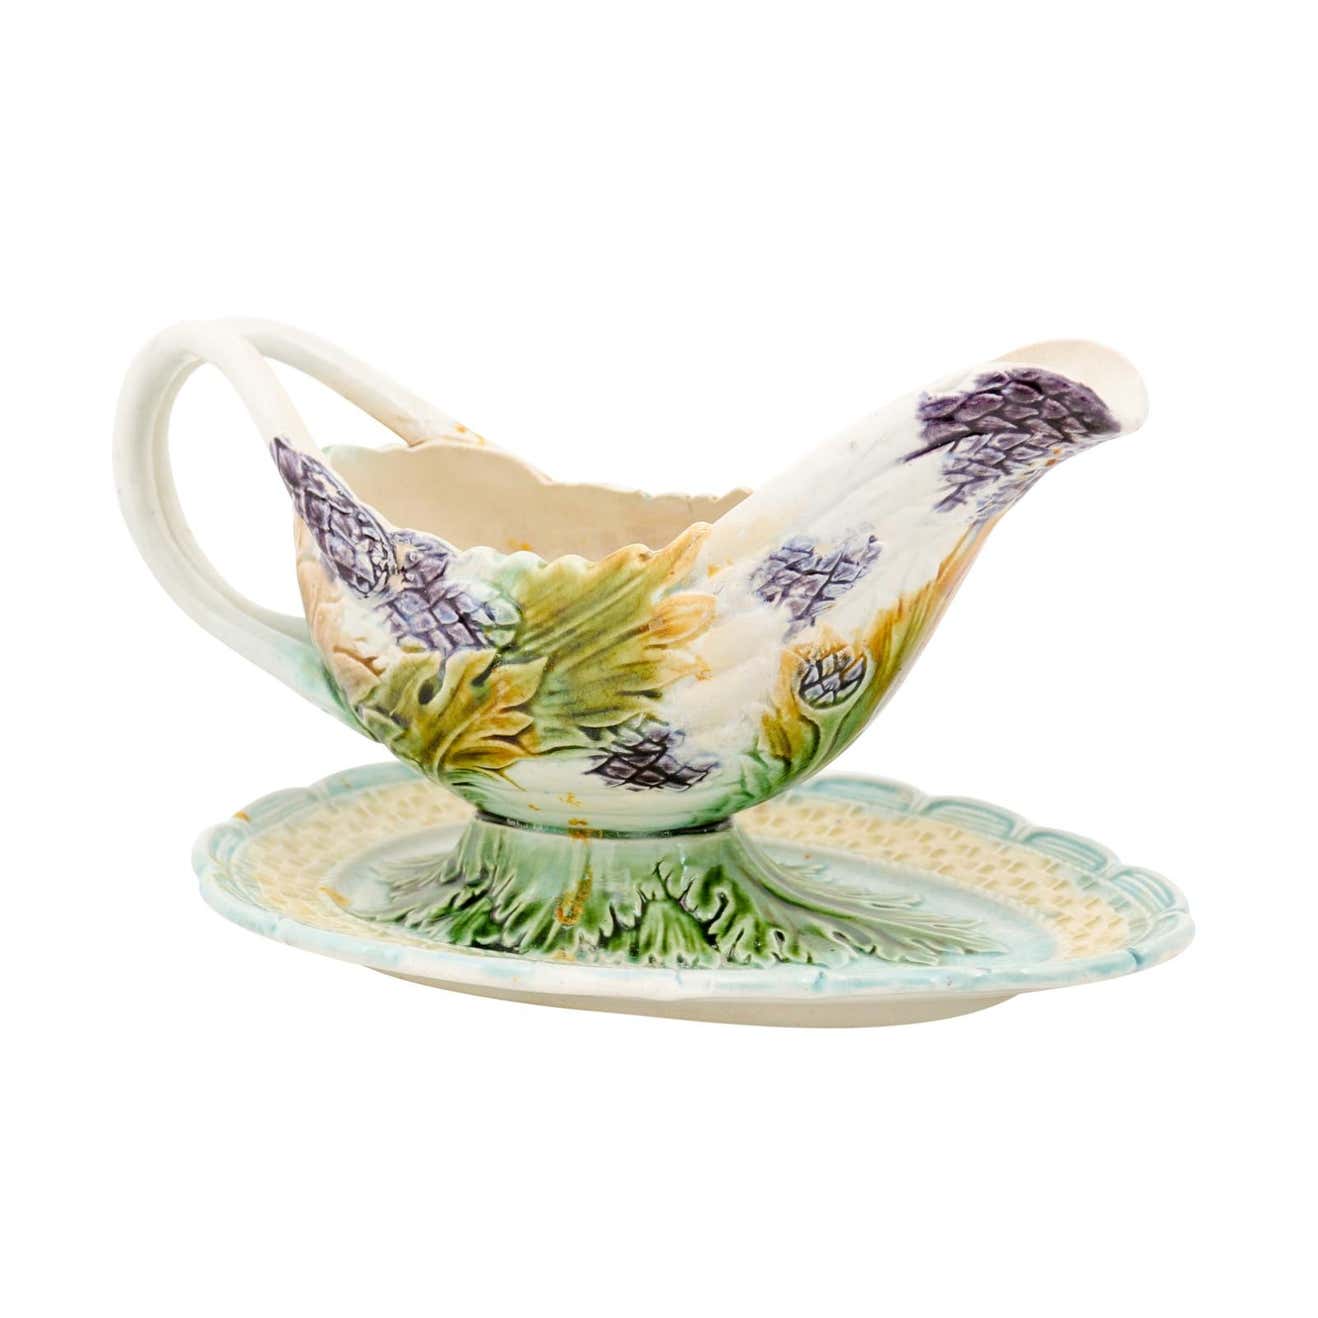 French 19th Century Majolica Gravy Boat with Asparagus Heads and Green Foliage